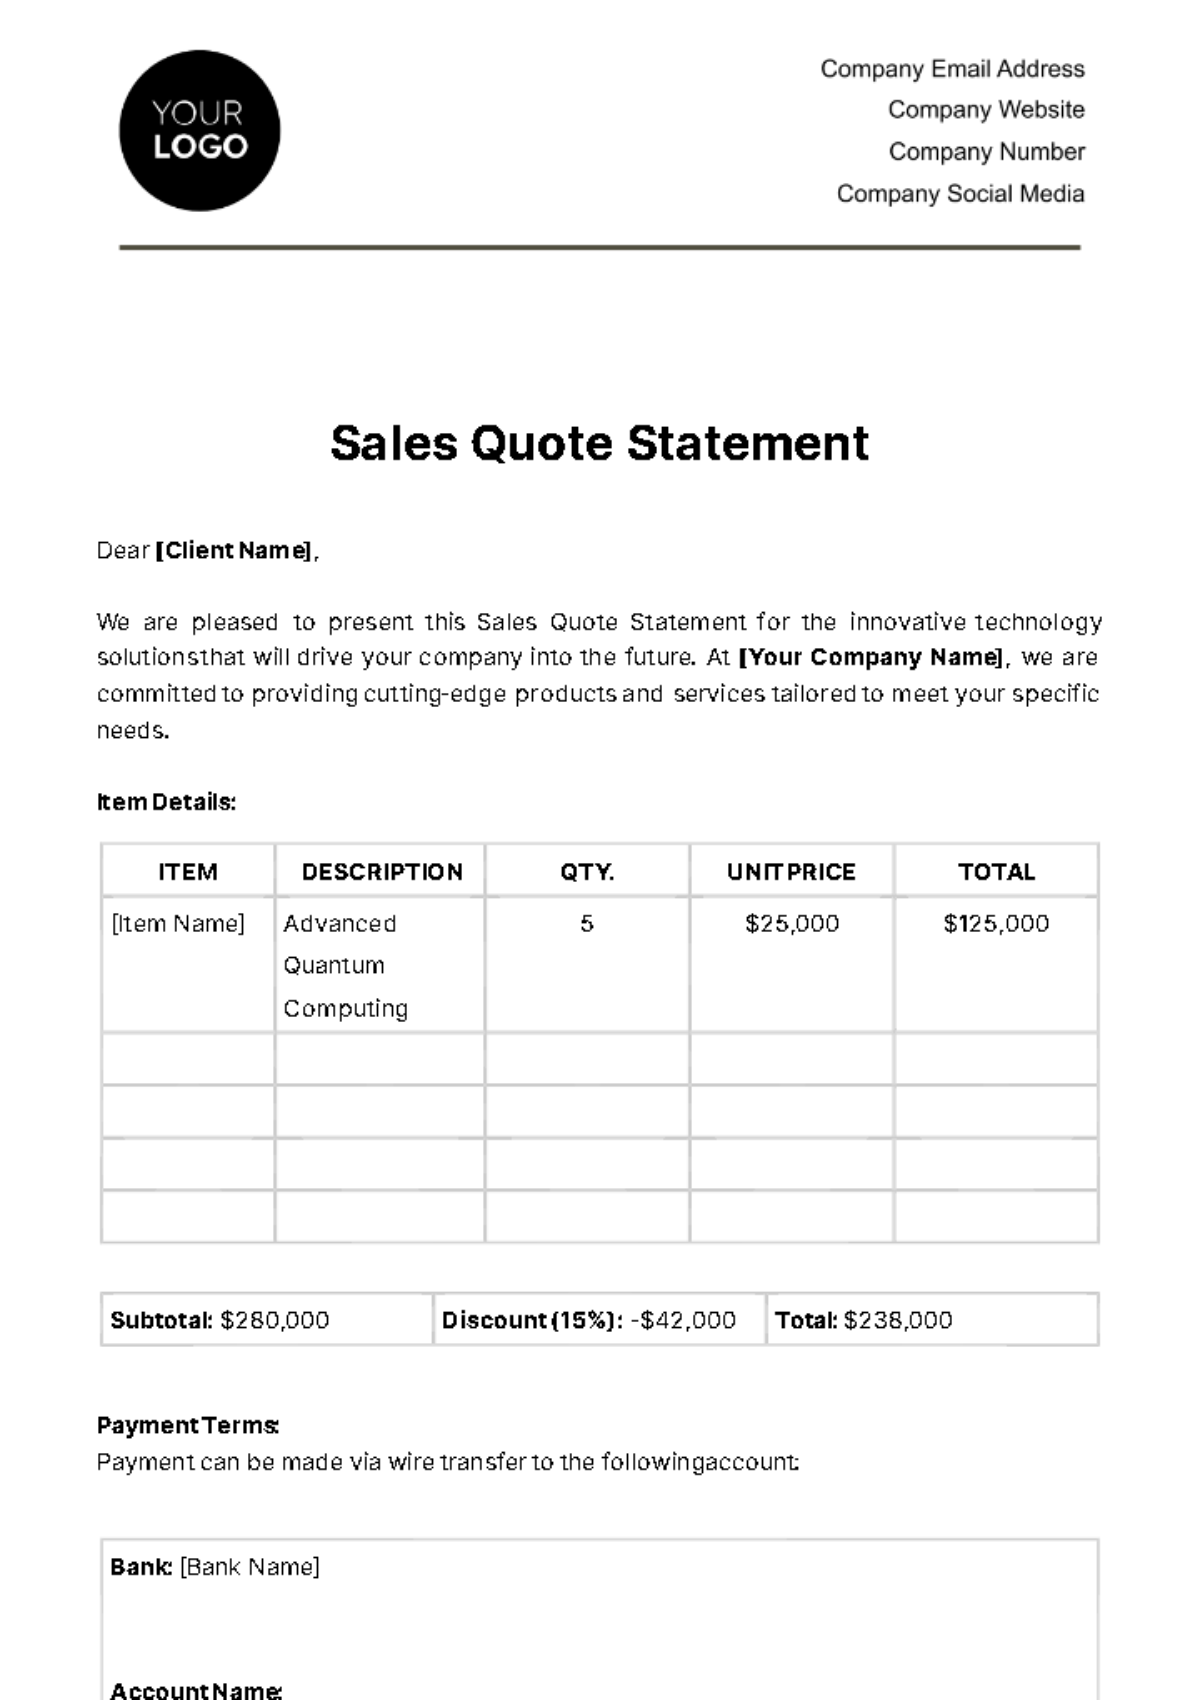 Free Sales Quote Statement Template